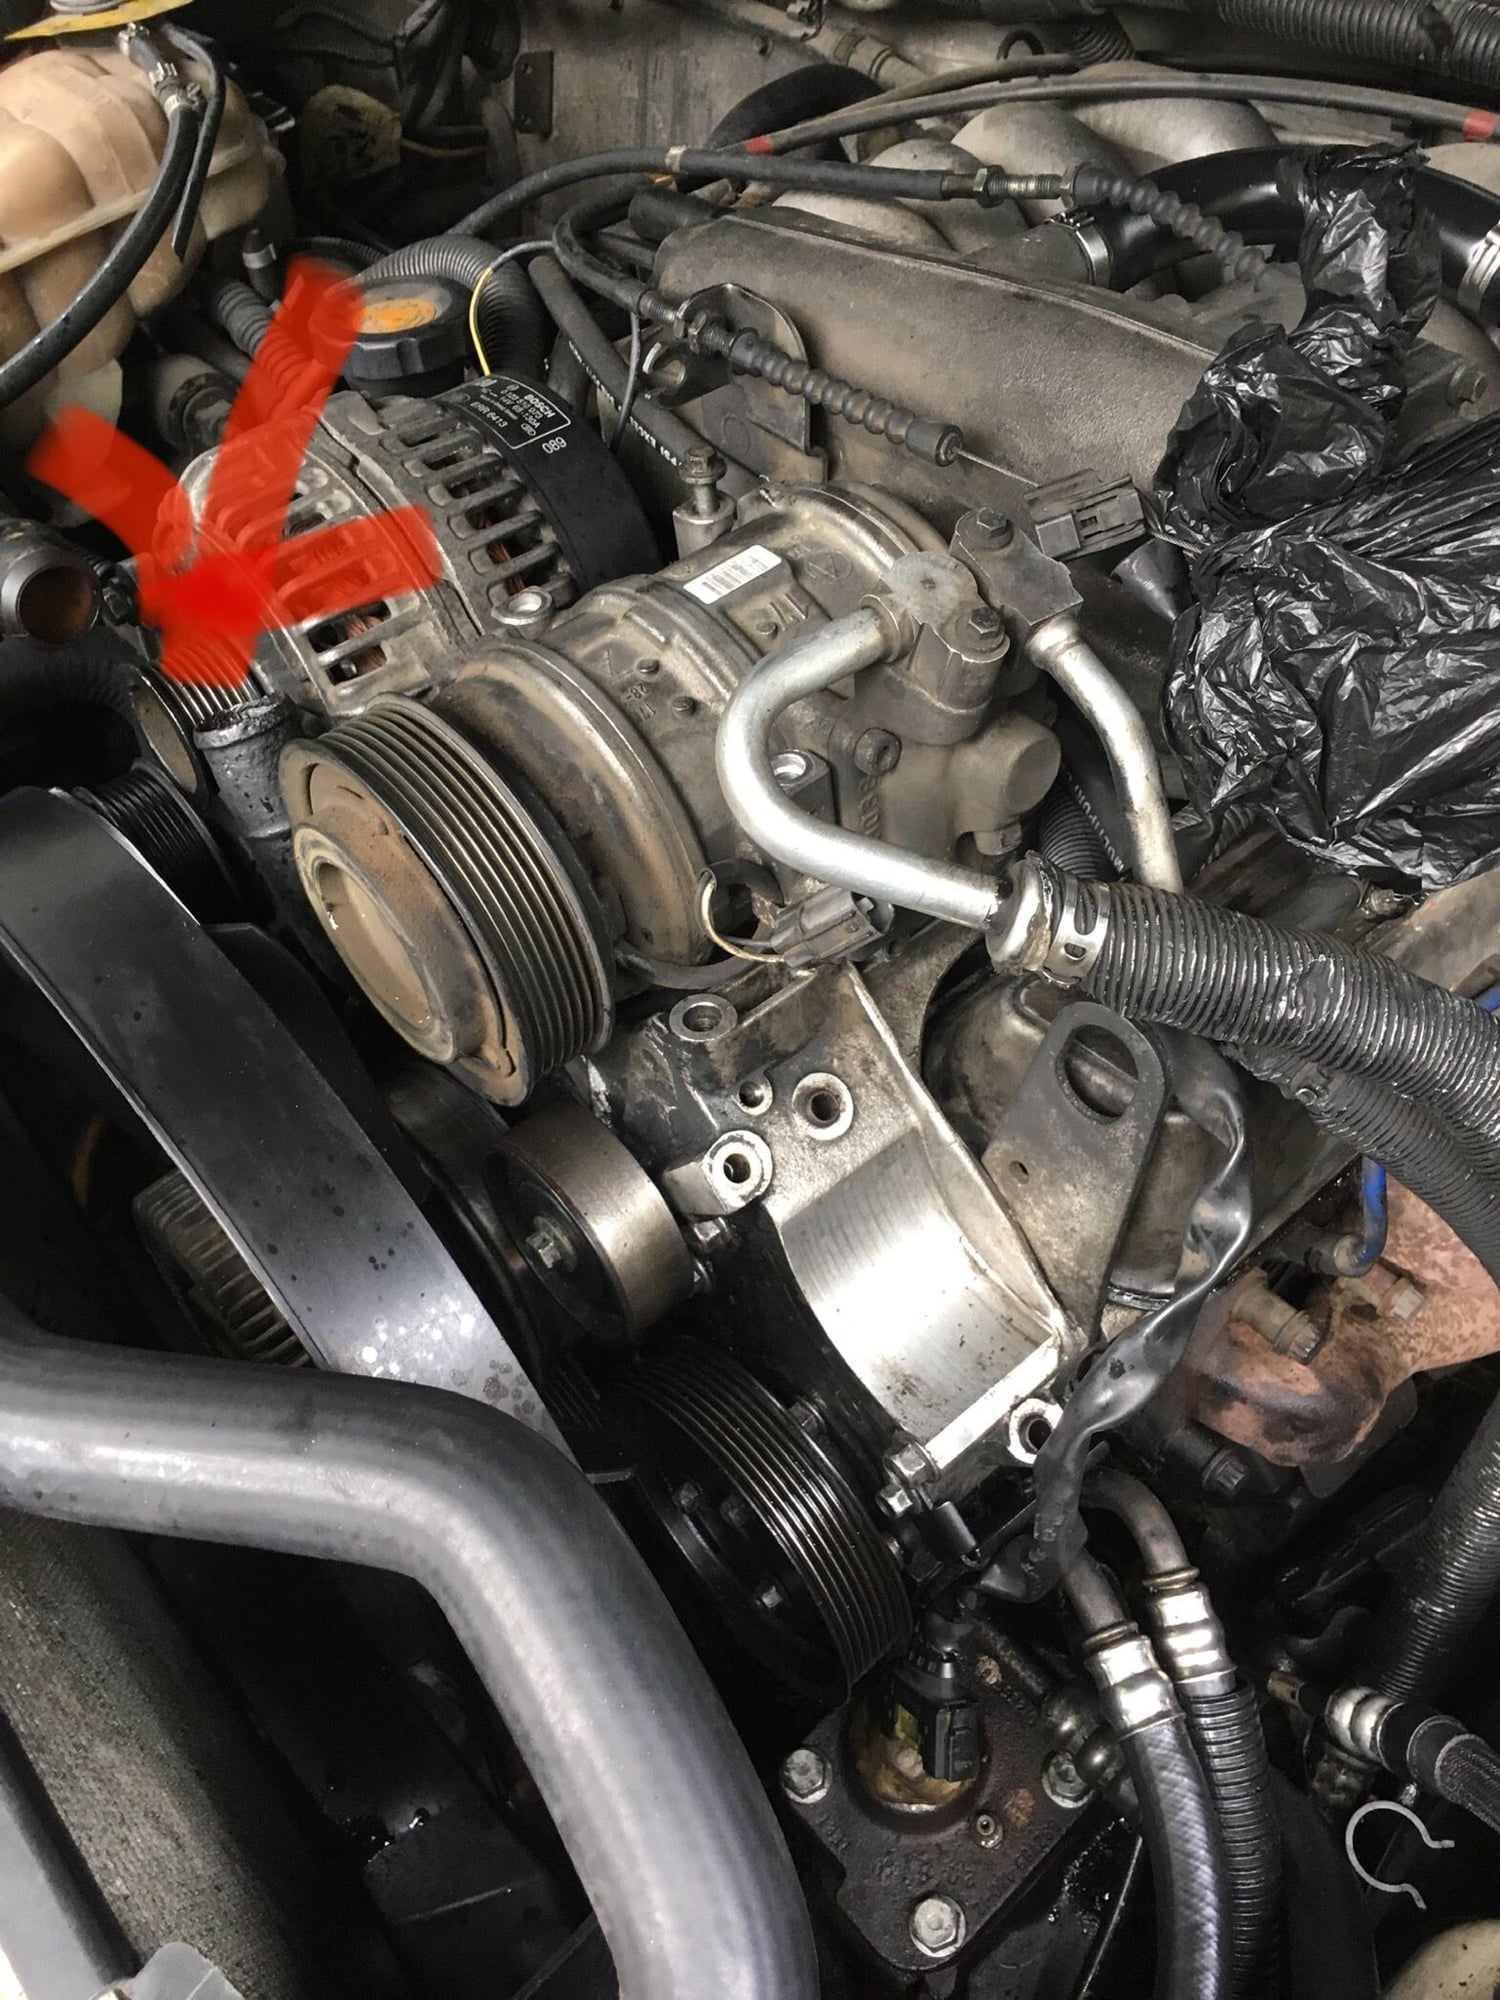 Water elbow pipe replacement - Land Rover Forums - Land Rover ...